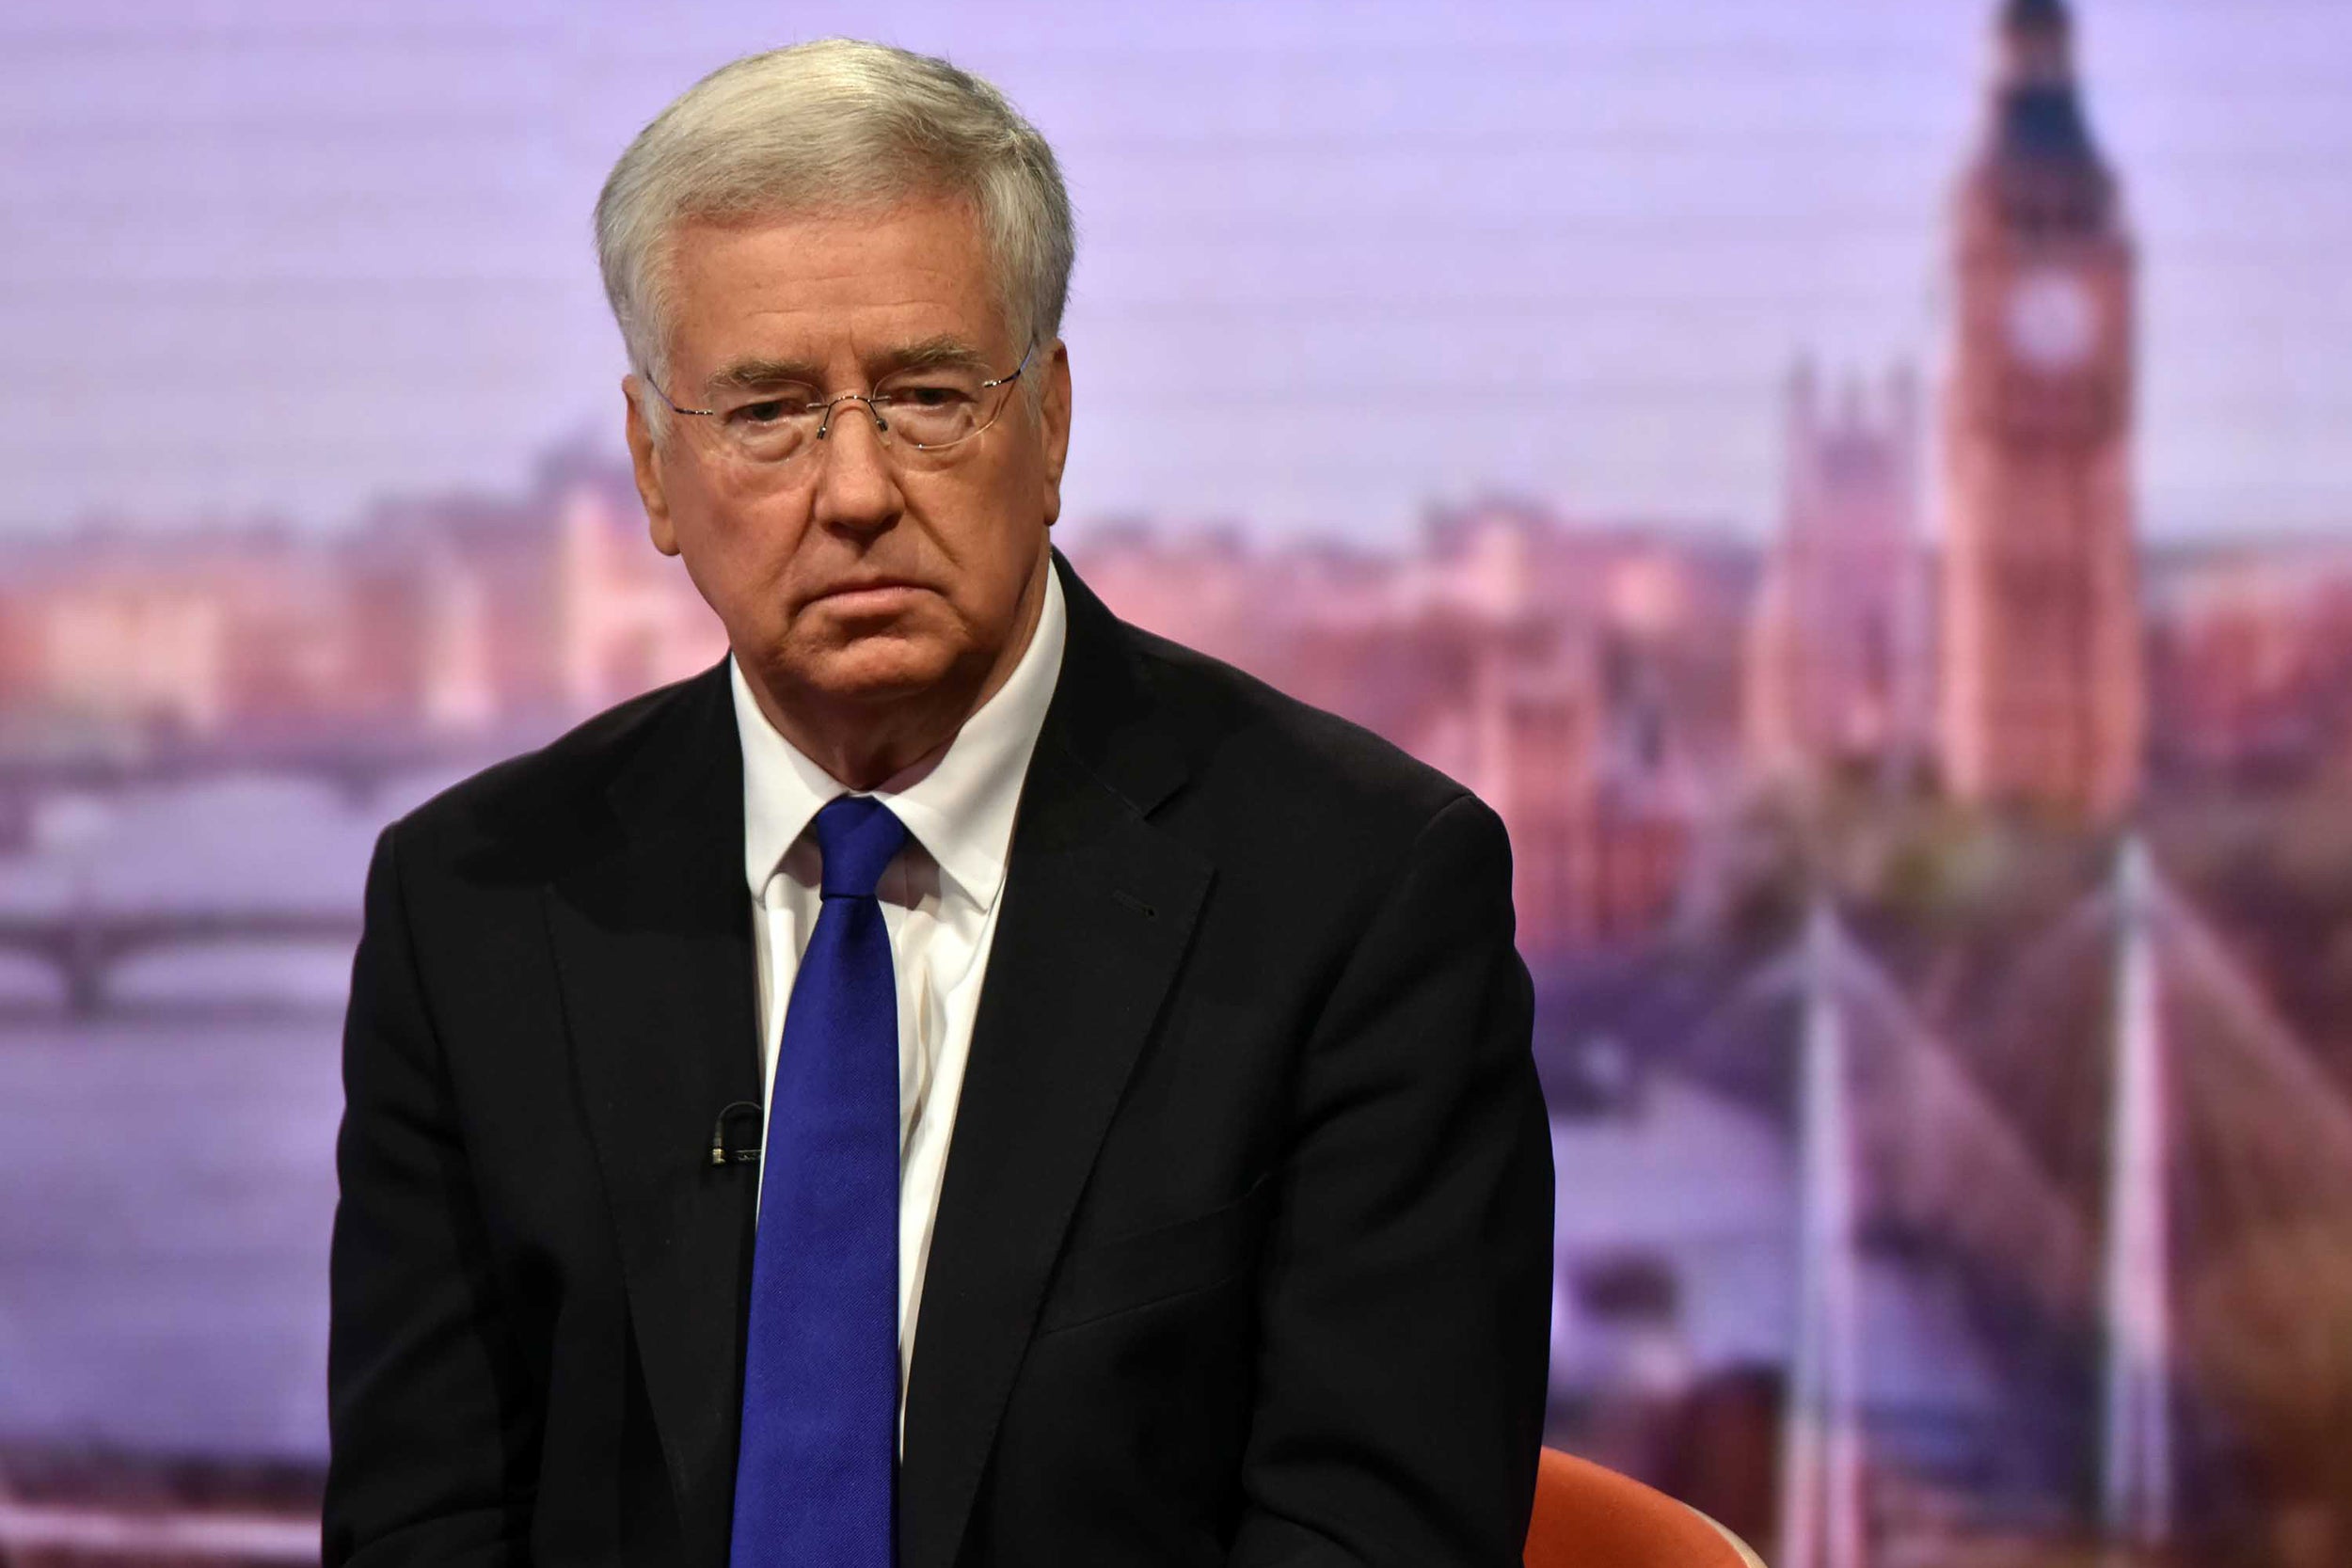 Michael Fallon is under fire over the incident in 2002